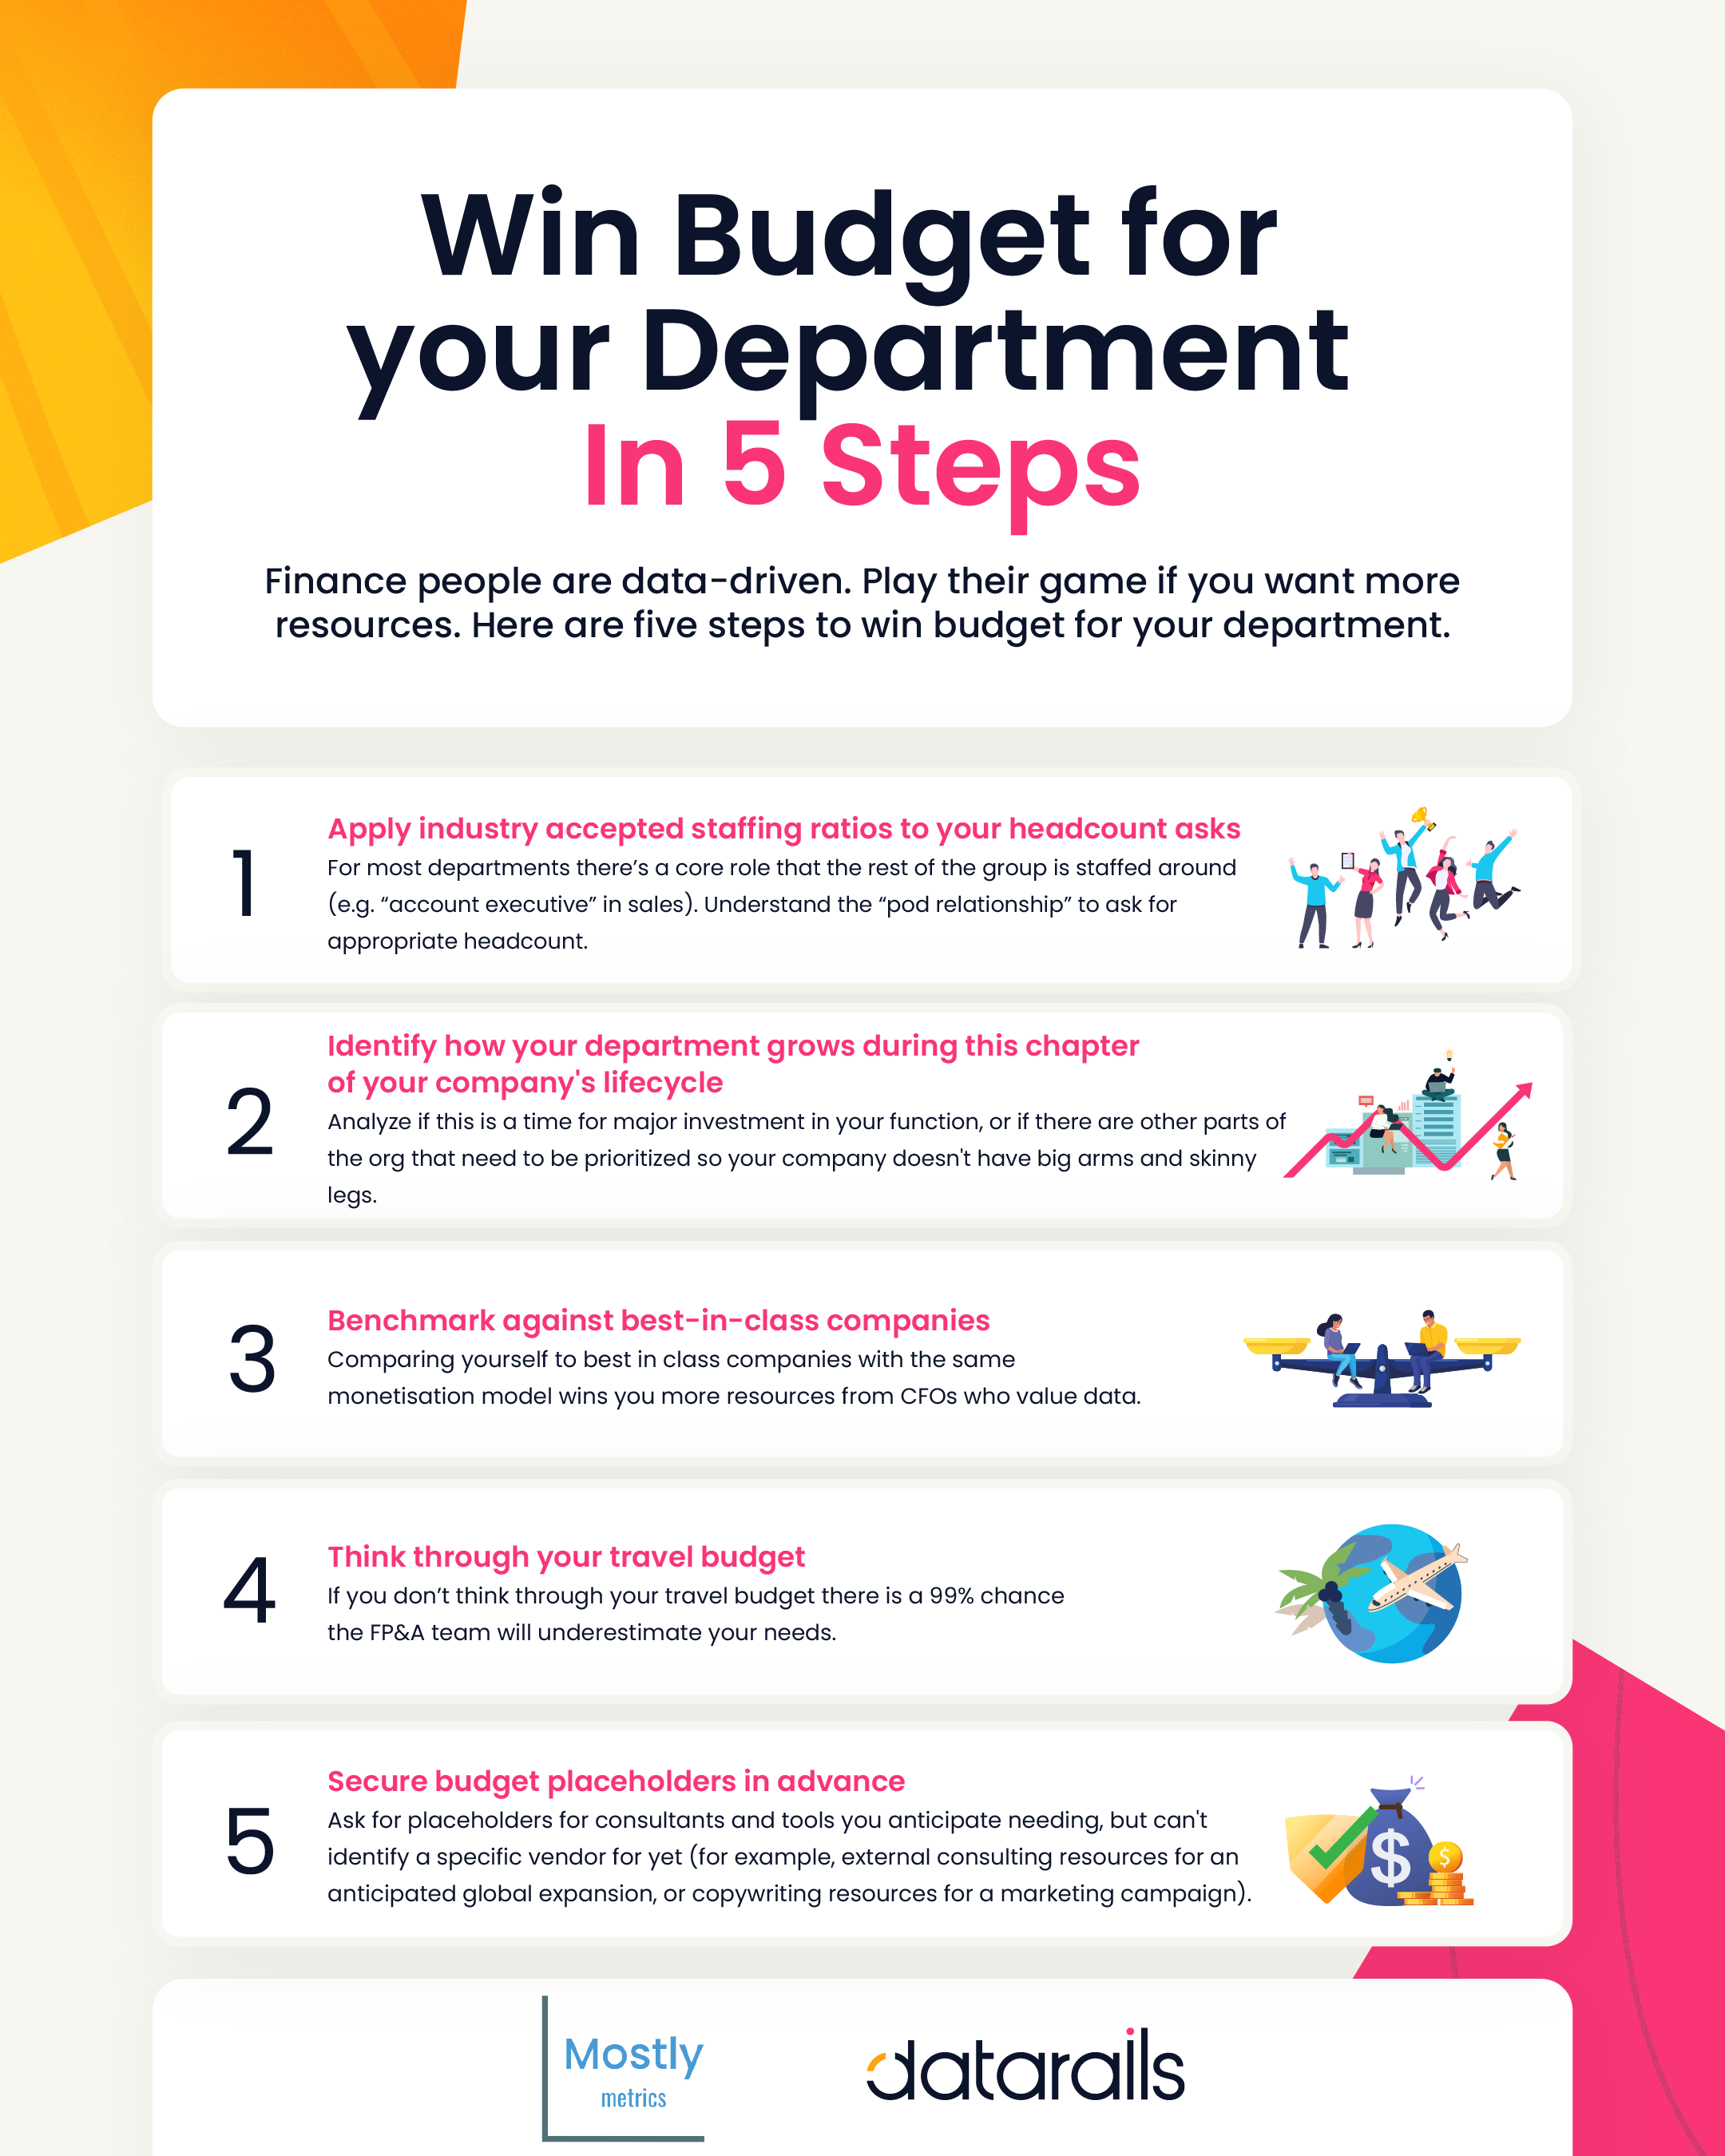 How to “win” budget for your department